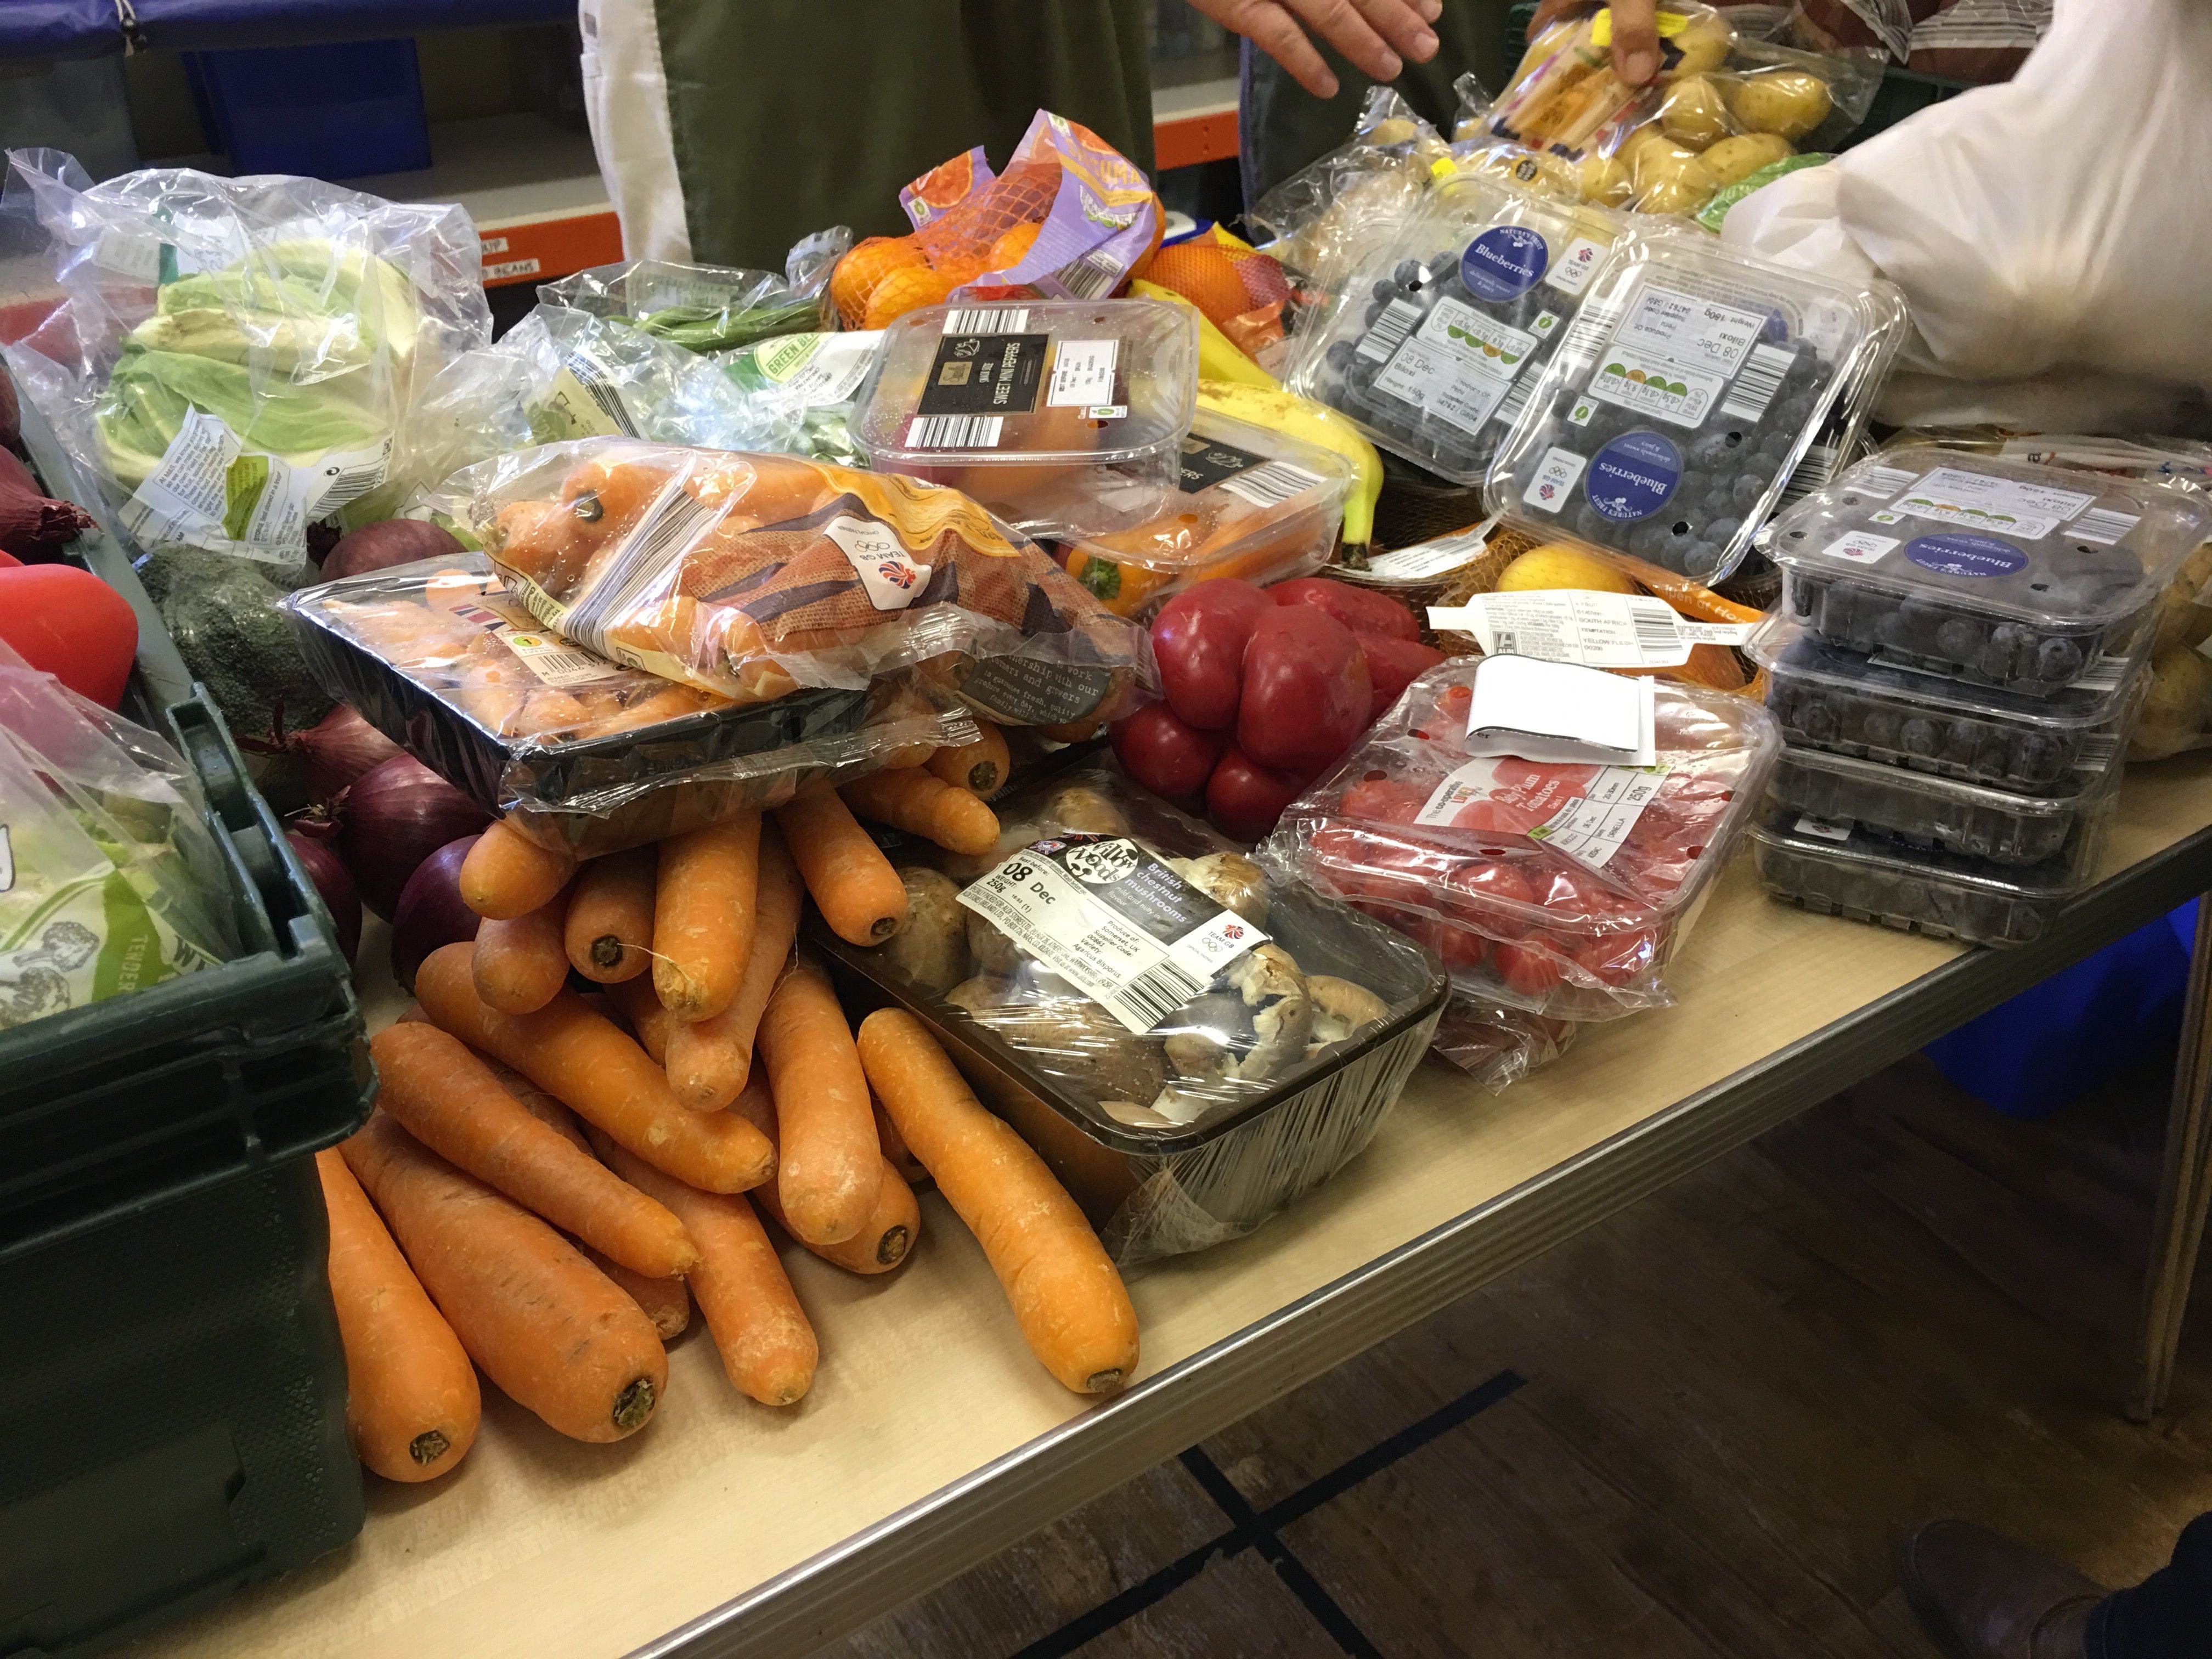 Fresh fruit and vegetables are not usually available at food banks, but due to a partnership with other local organisations the team is able to offer them alongside their usual non-perishable items - highly important in helping clients' nutrition. Image by Caitlin Bawn. England, 2016.